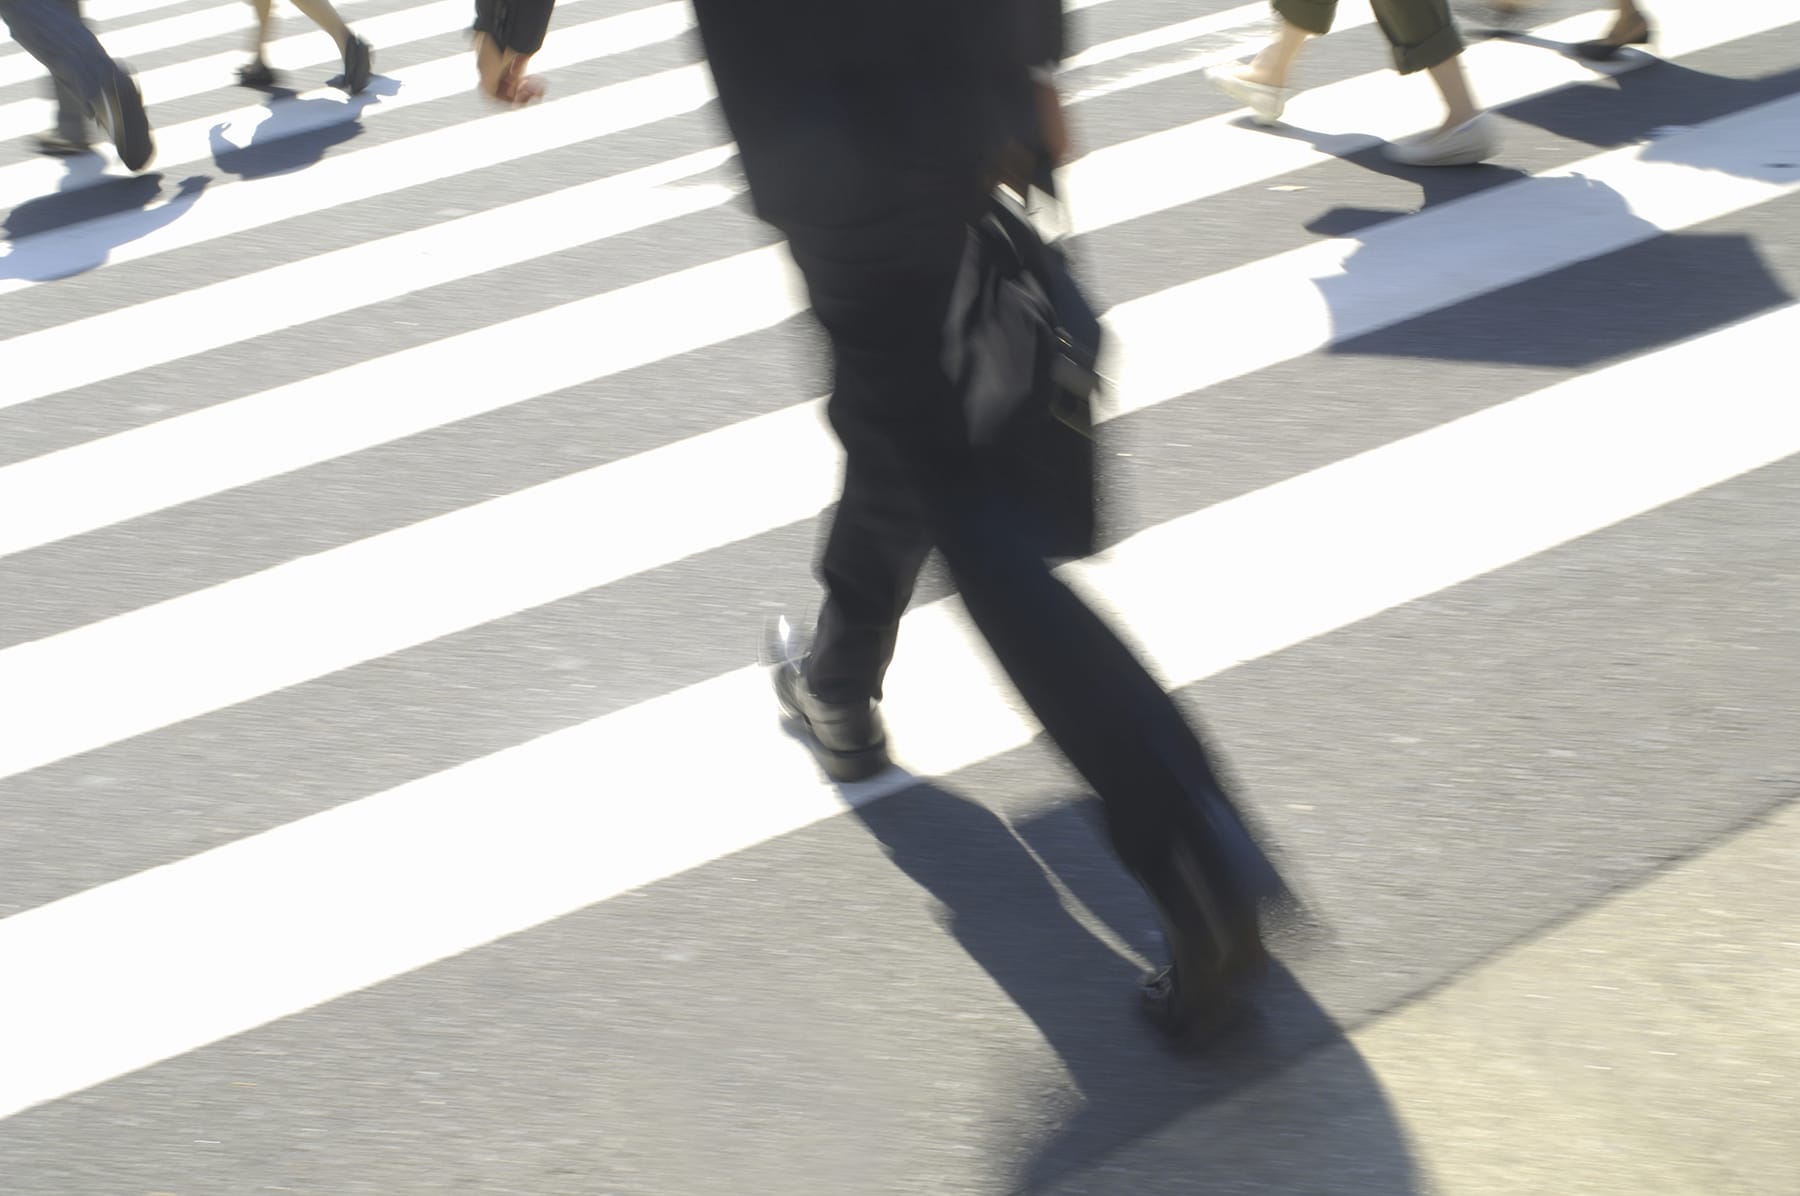 pedestrian accident law firm